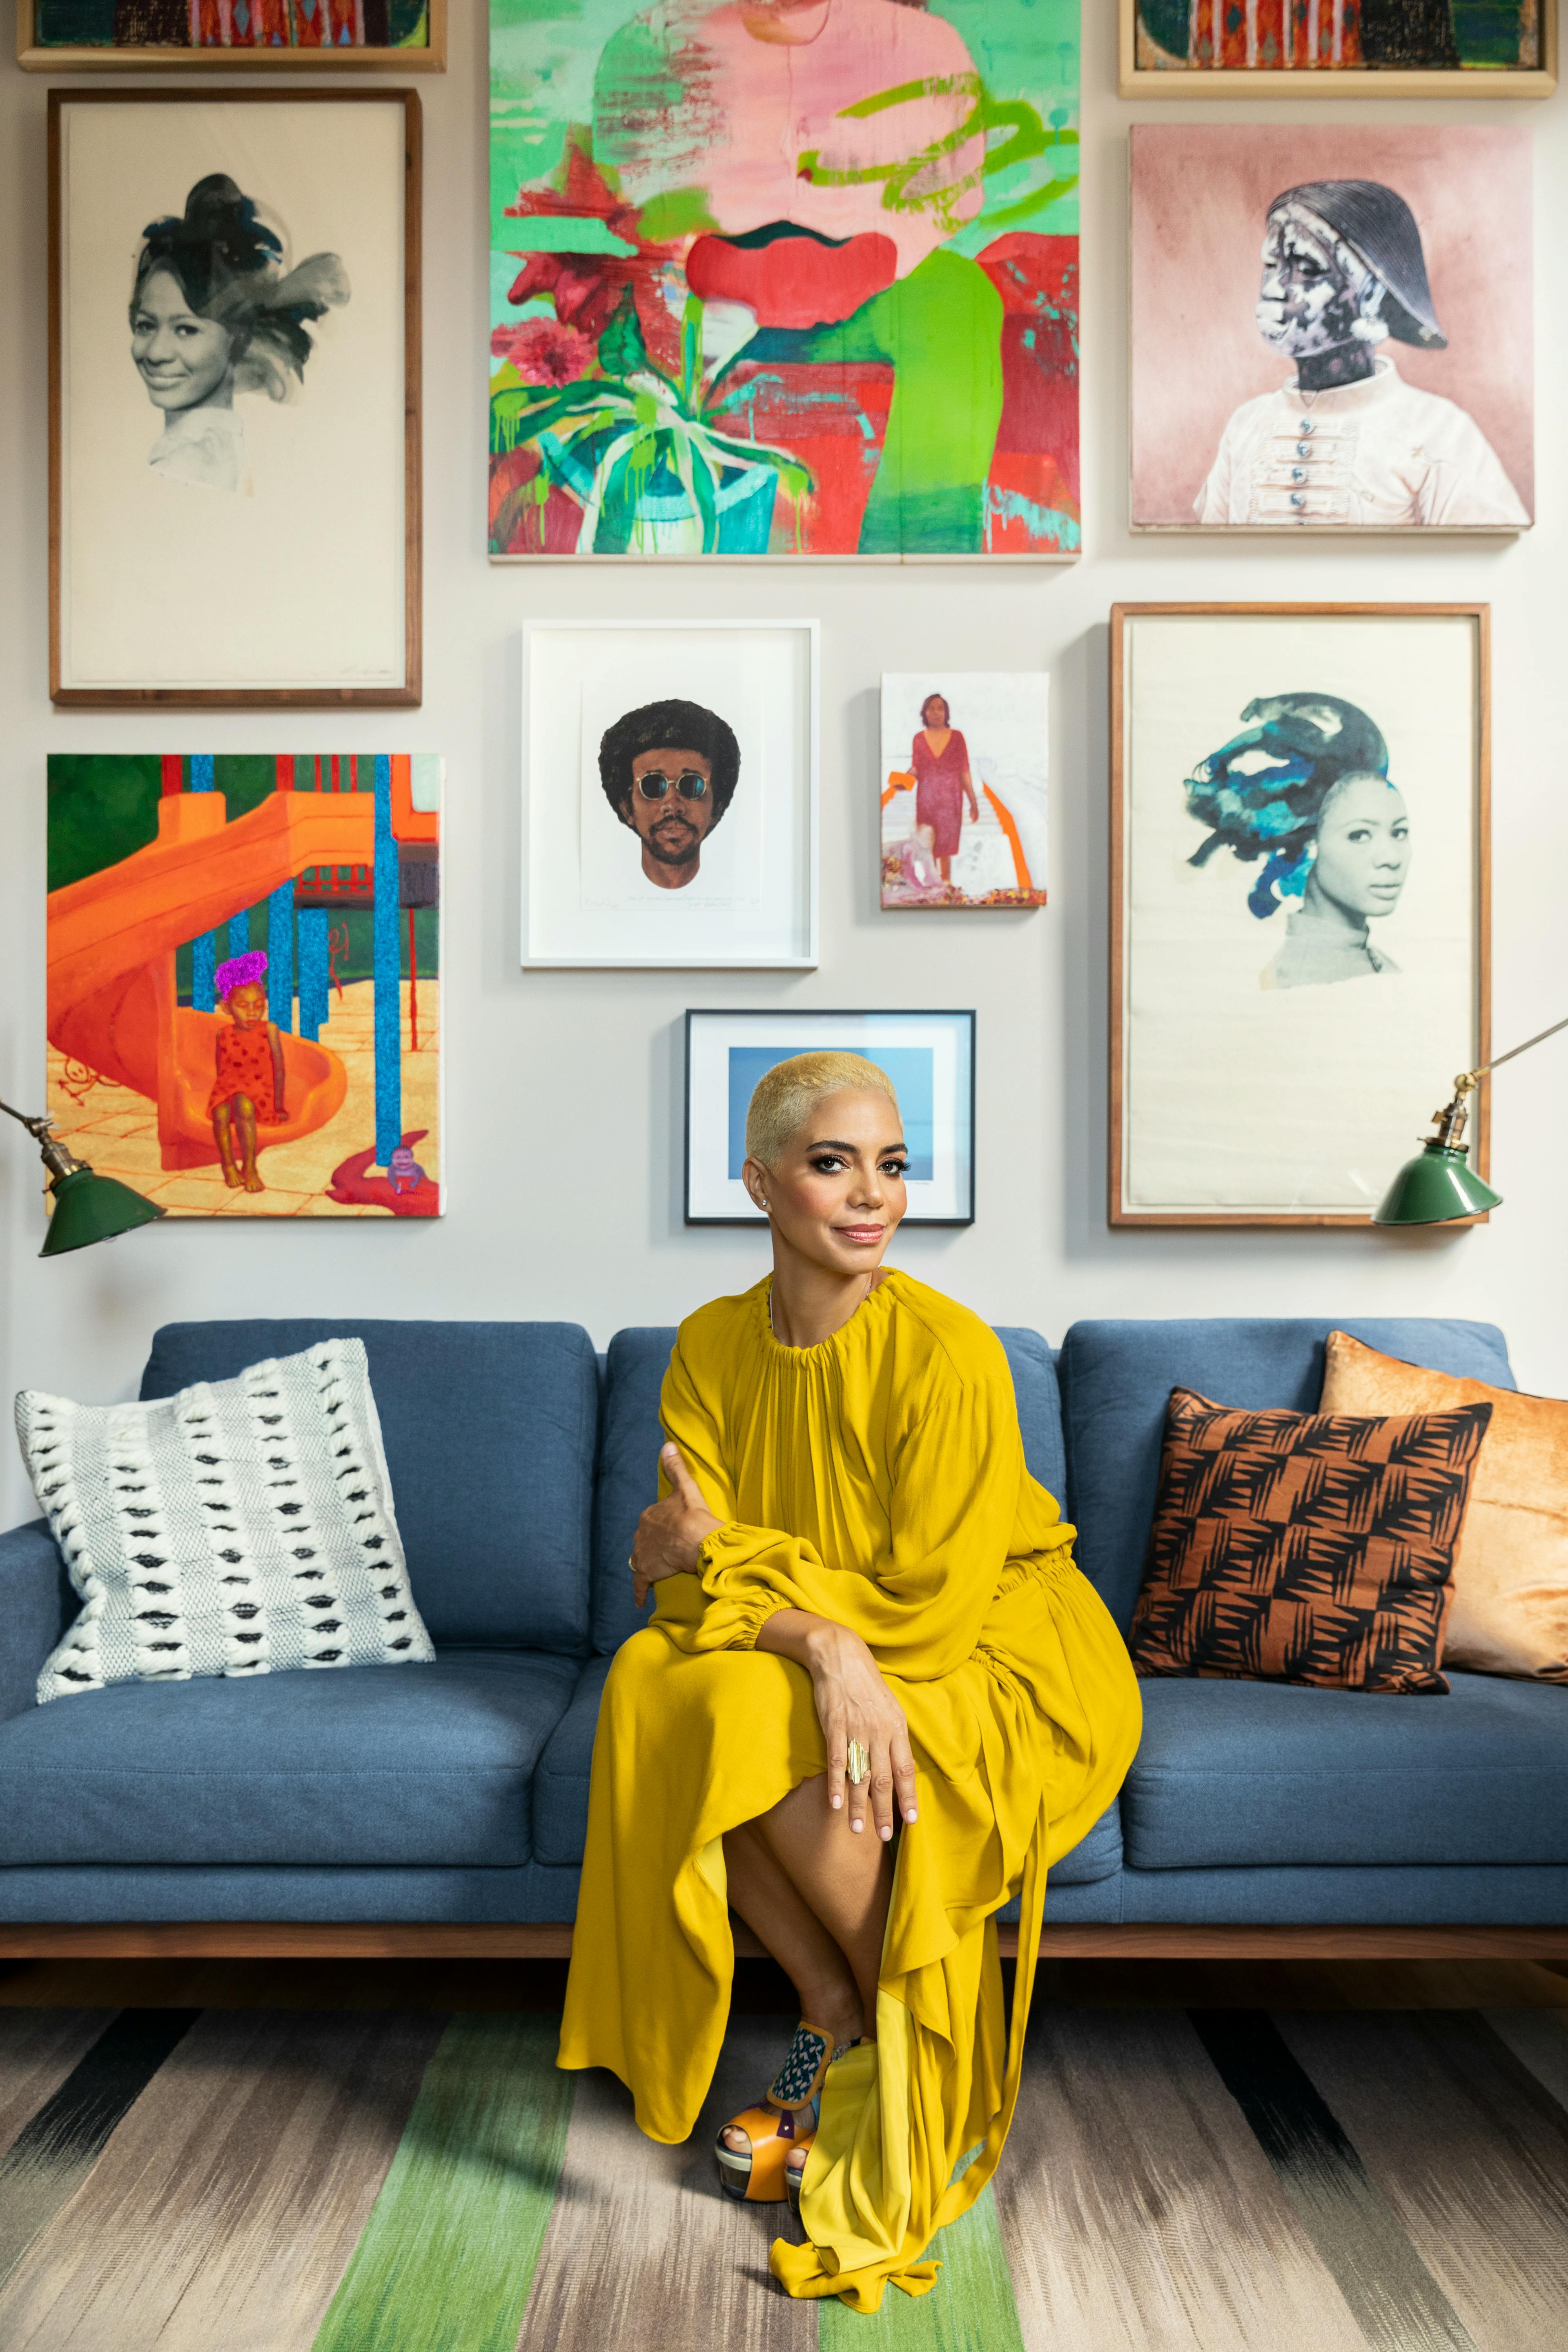 A portrait of interior designer Danielle Colding, wearing a long yellow dress and seated on a blue couch with multiple artworks hanging behind her.